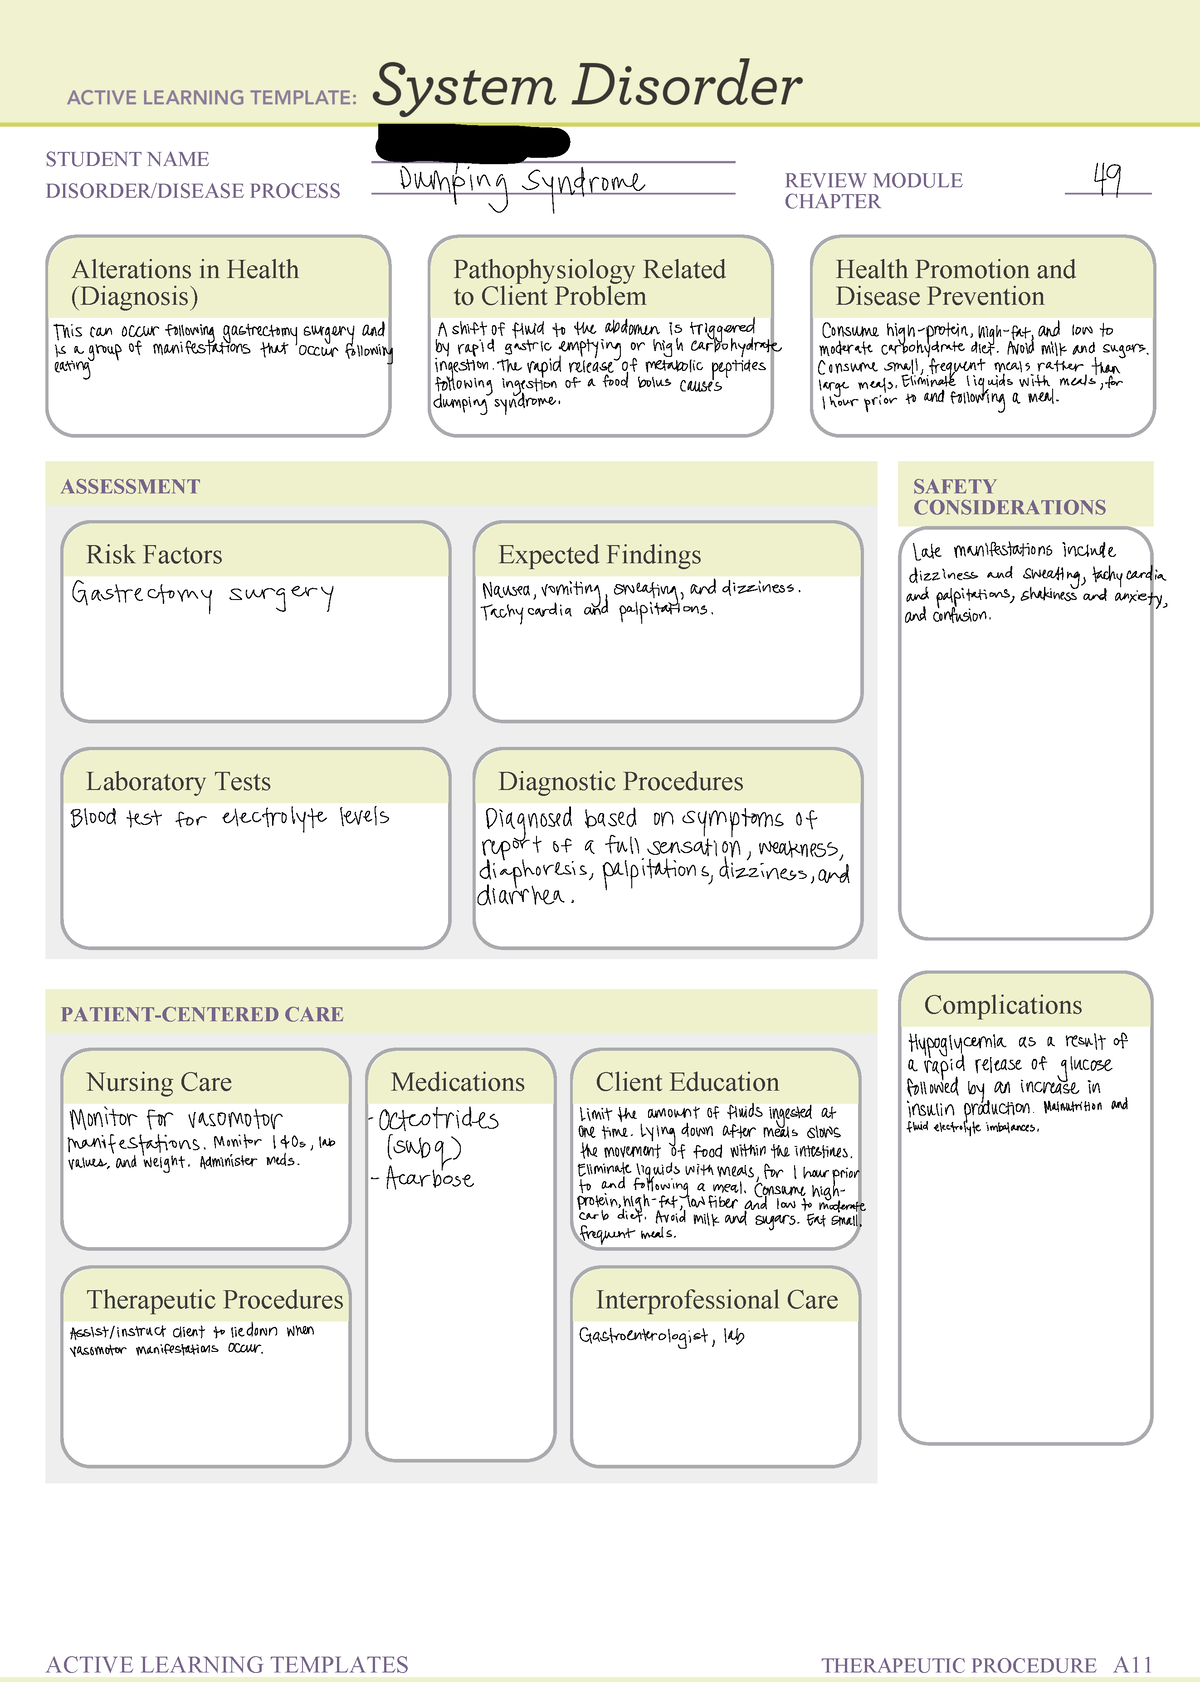 Dumping Syndrome System Disorder Template STUDENT NAME DISORDER